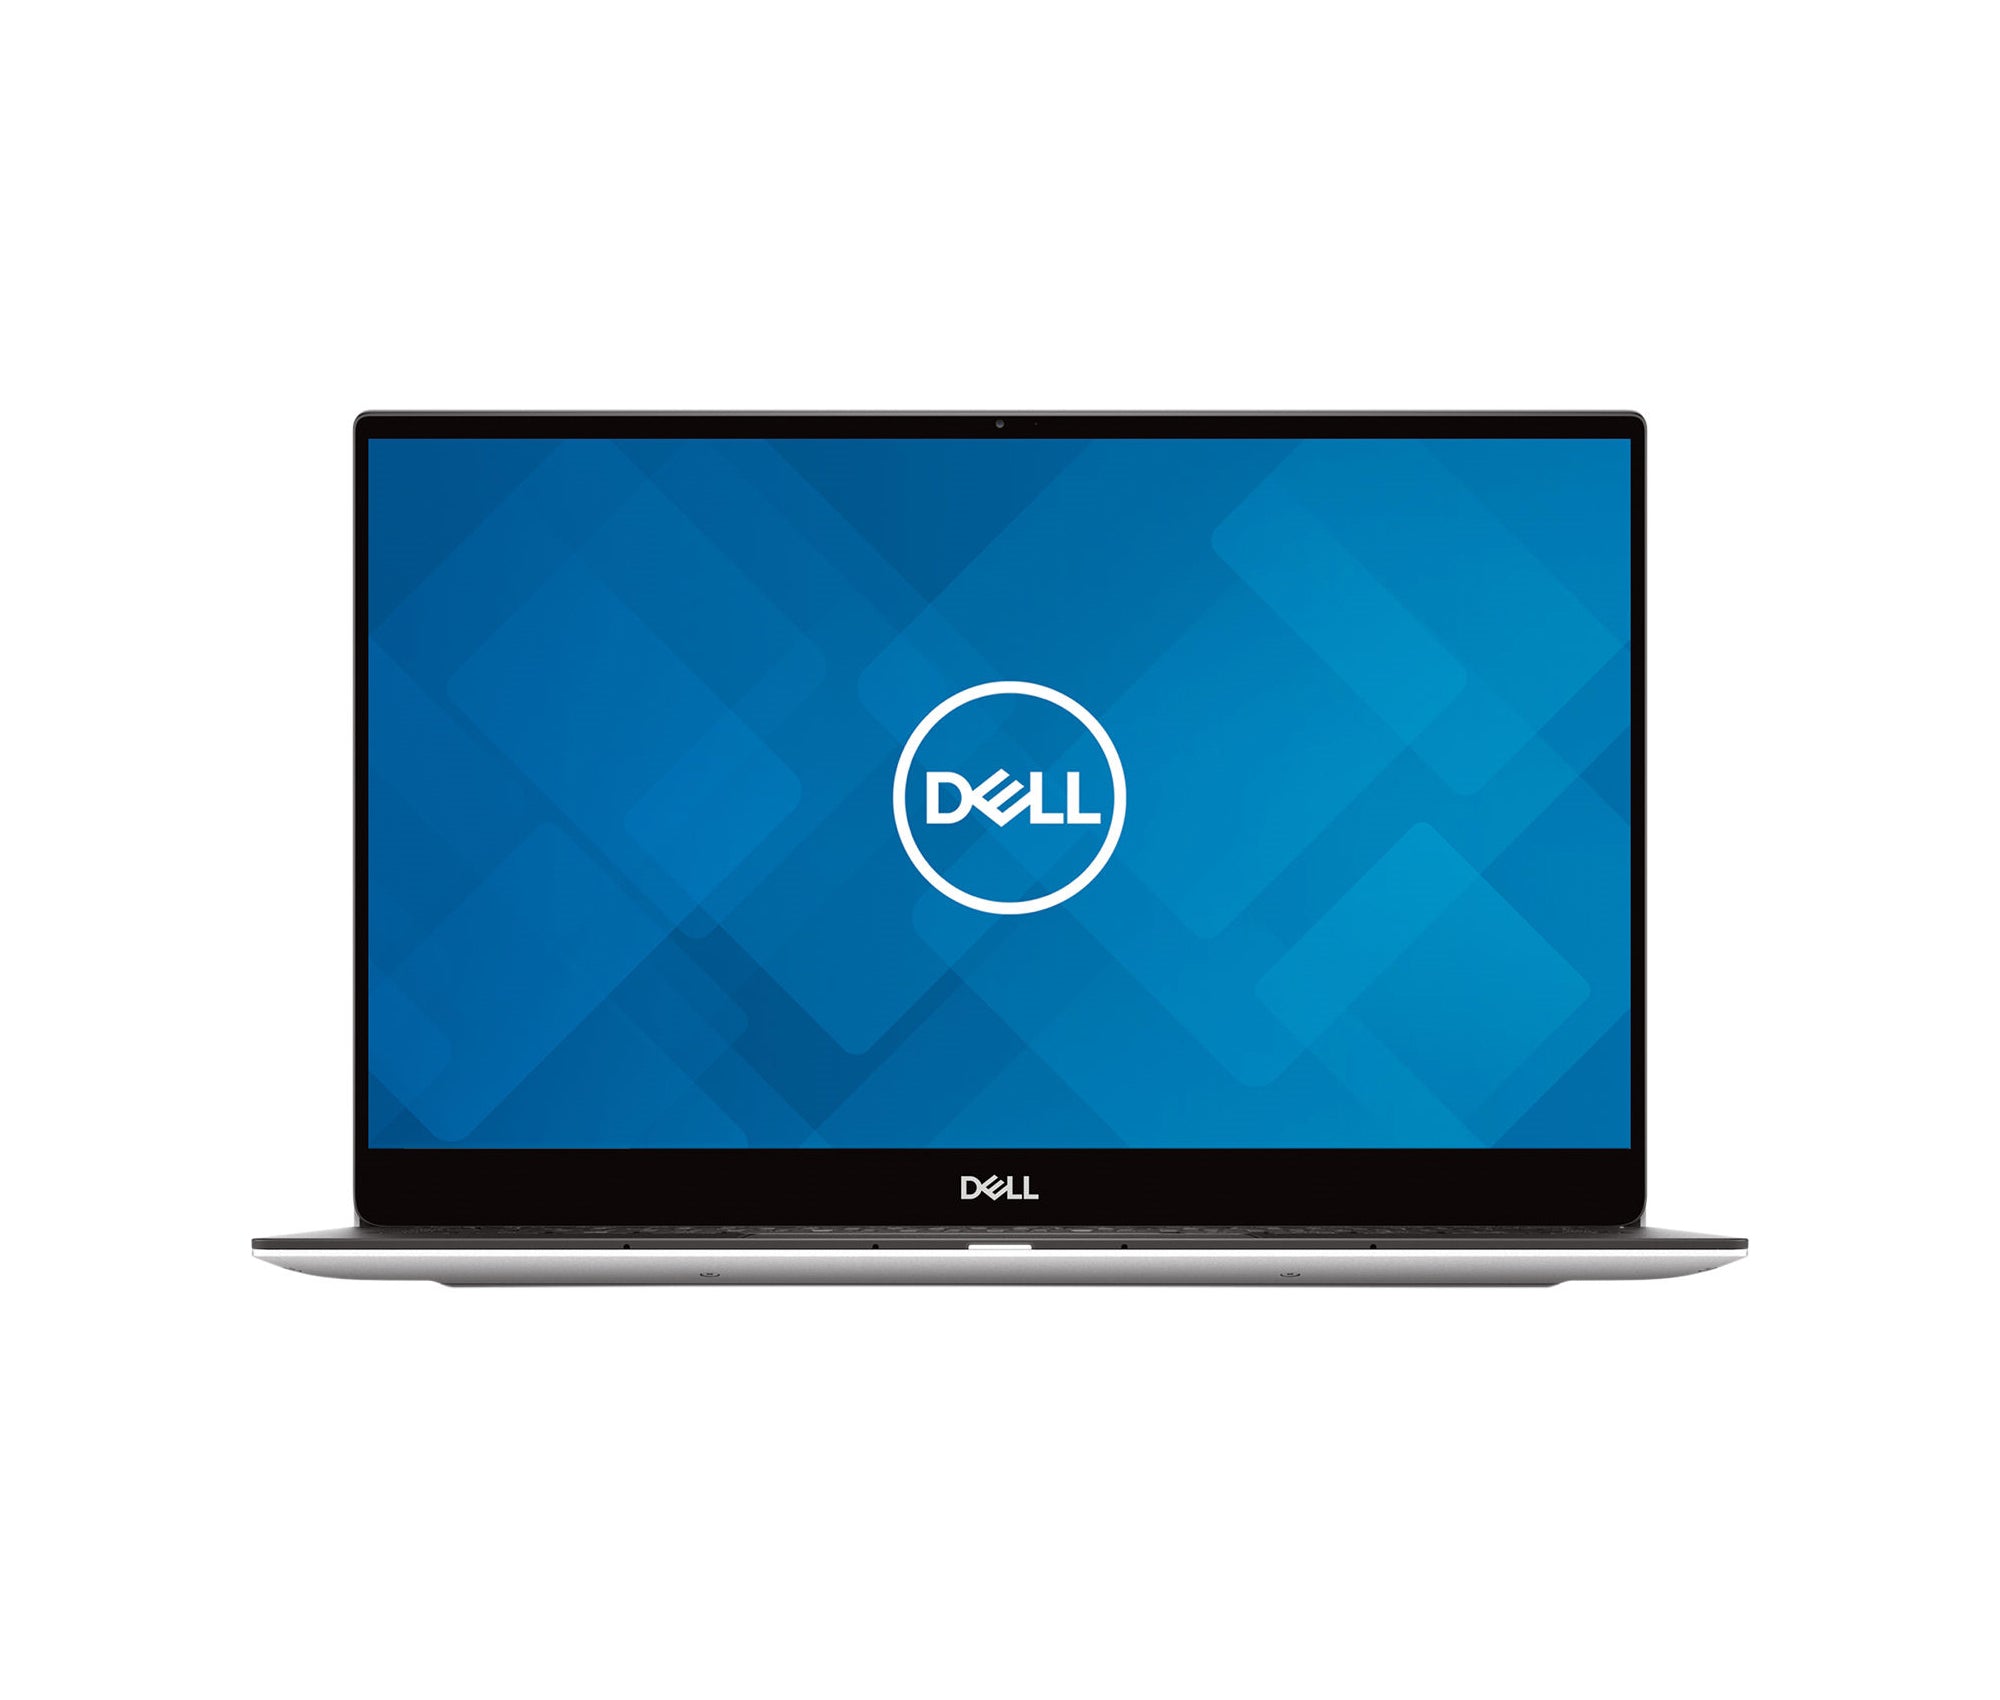 Dell XPS 13 7390, 13.3